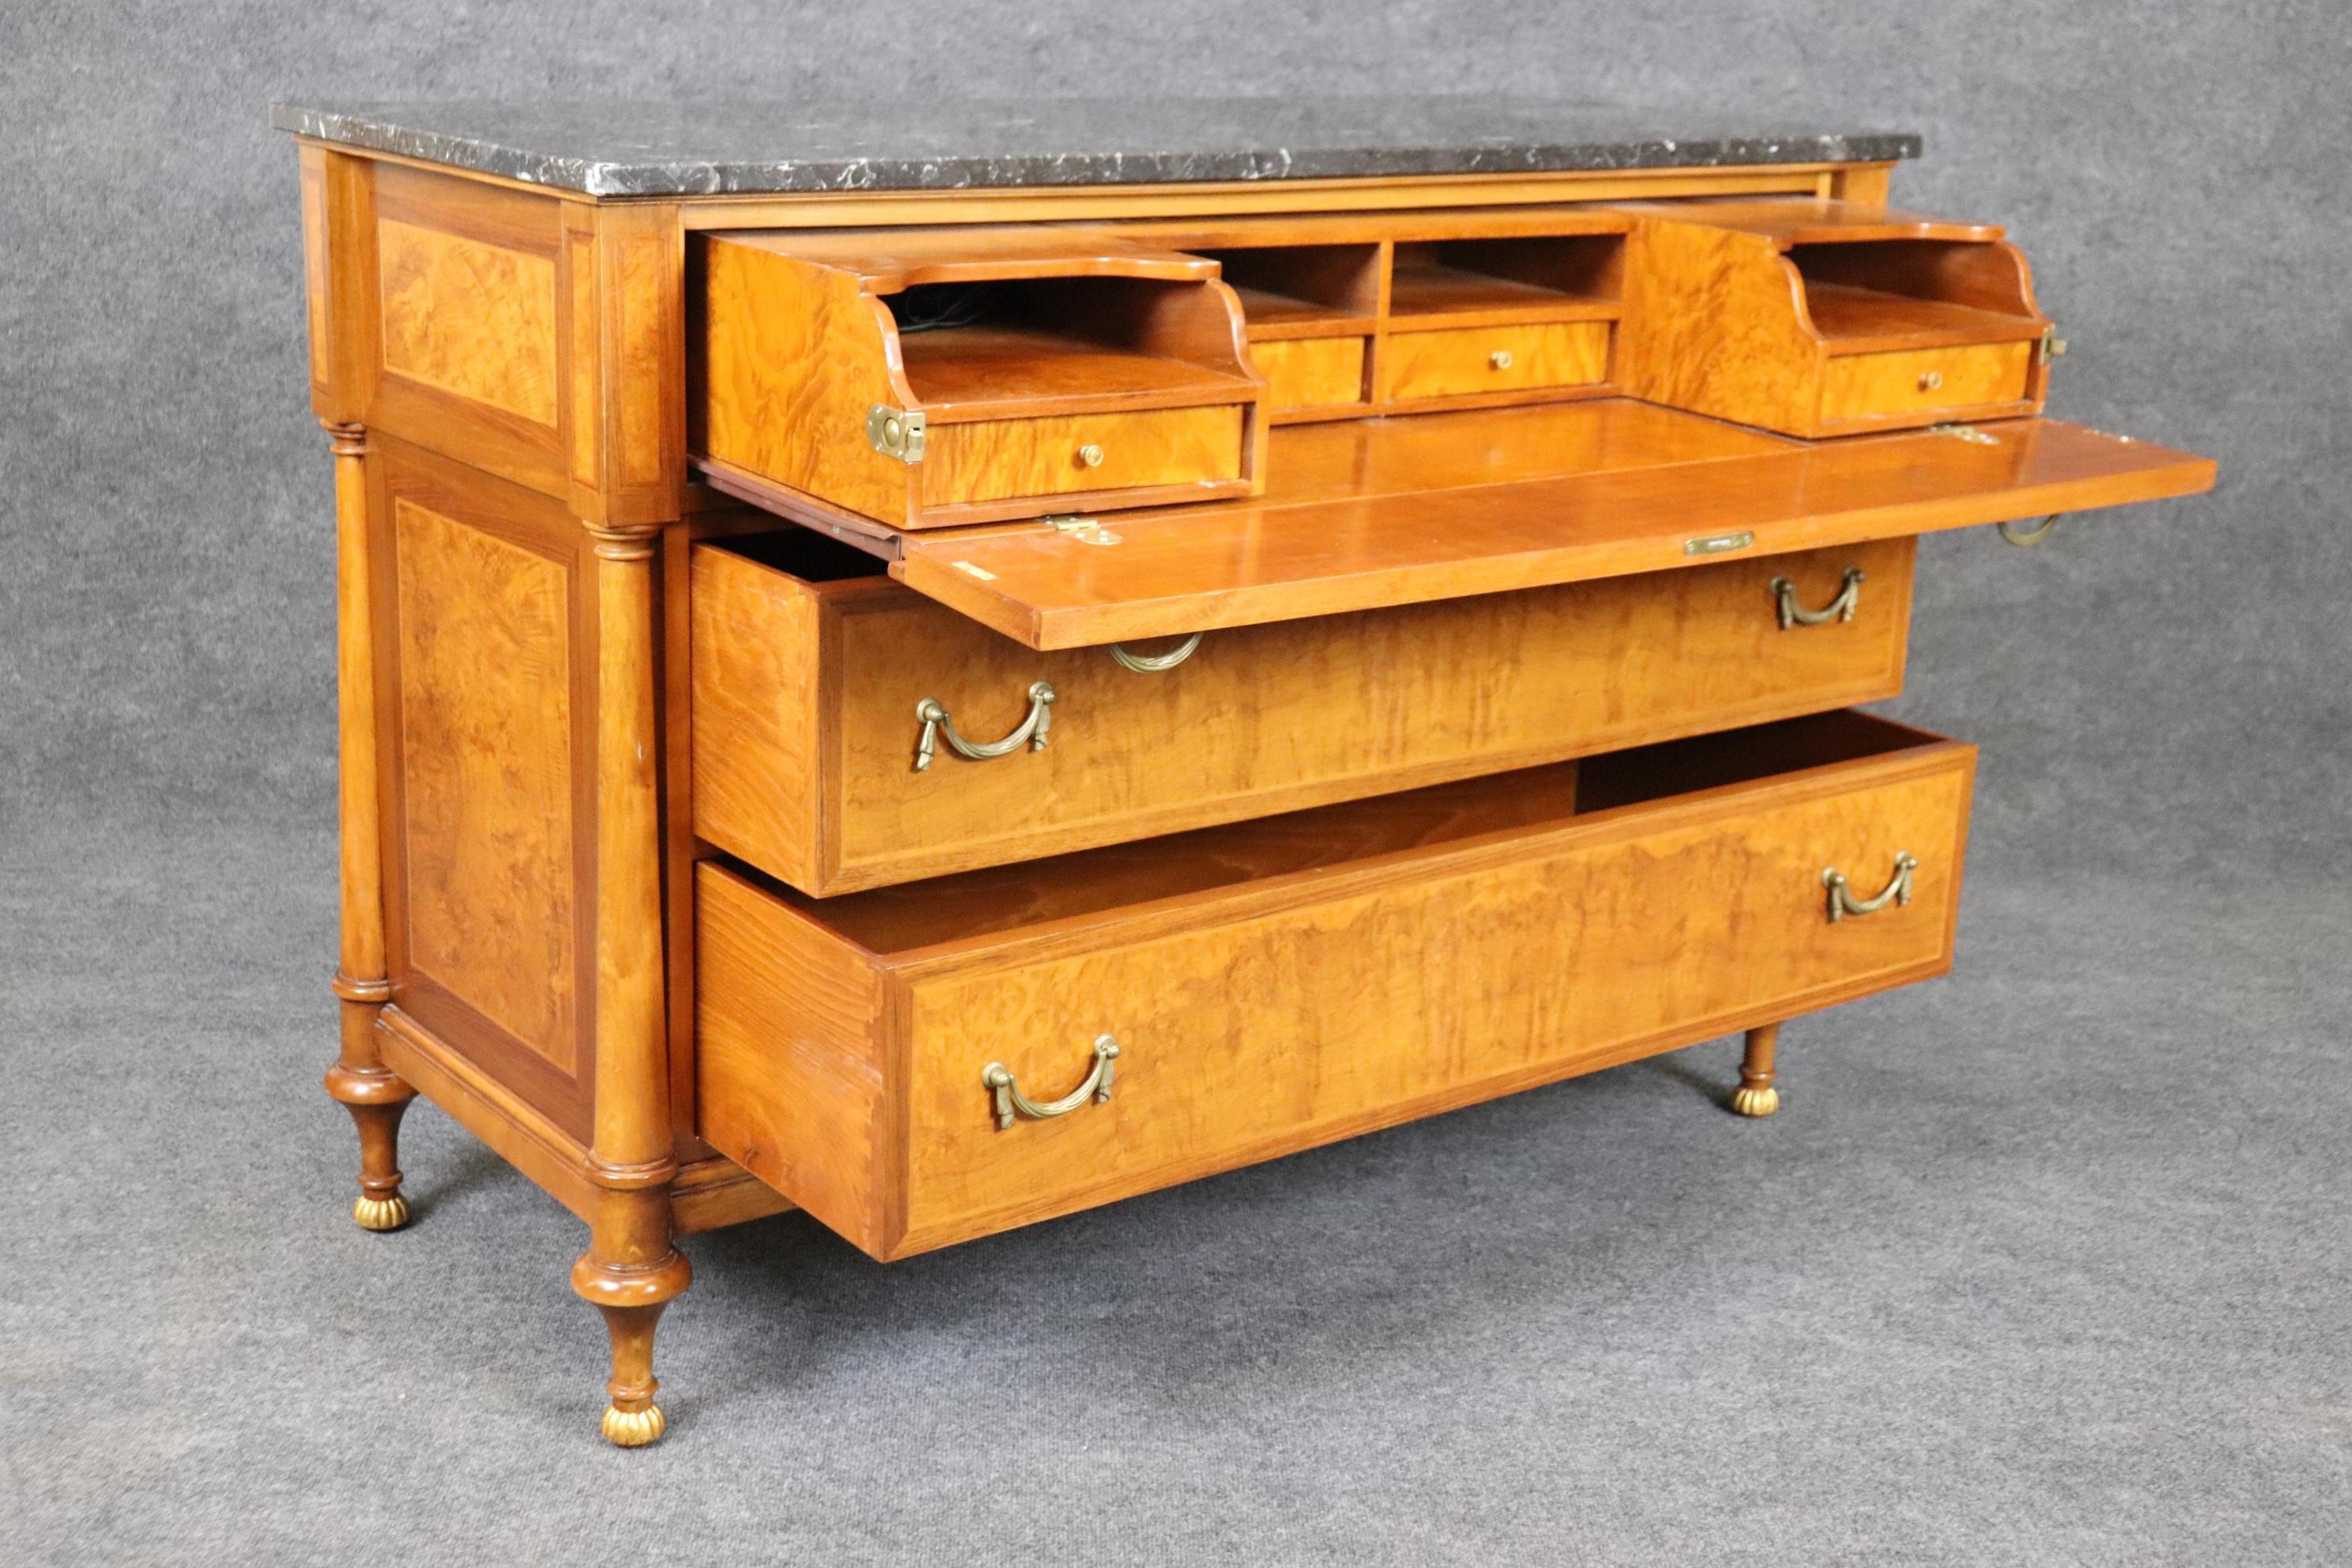 This is a gorgeous butler's commode with a dropdown desk with cubbies. The commode is made of figured cherry with beautiful brass hardware and a great marble top. Measures 53.25 wide x 38.5 tall x 22.25 deep. Dates to the 1990s era.